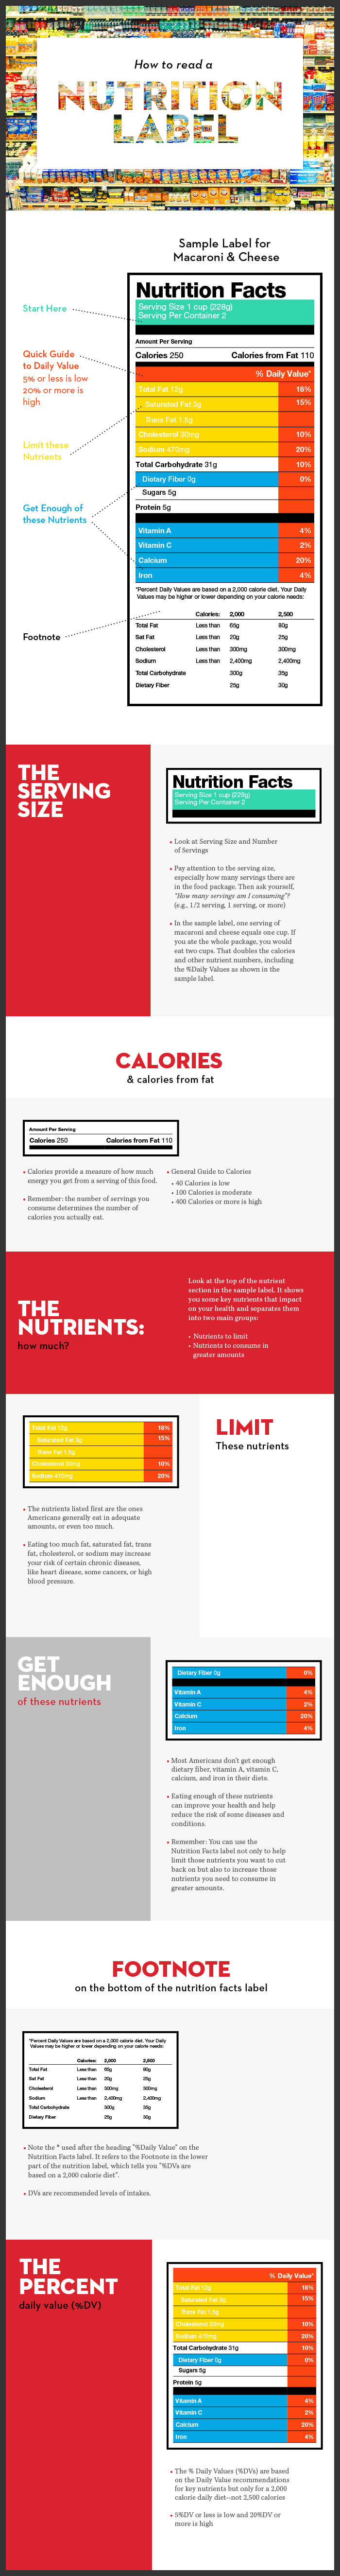 How to Read a Nutrition Label Infographic